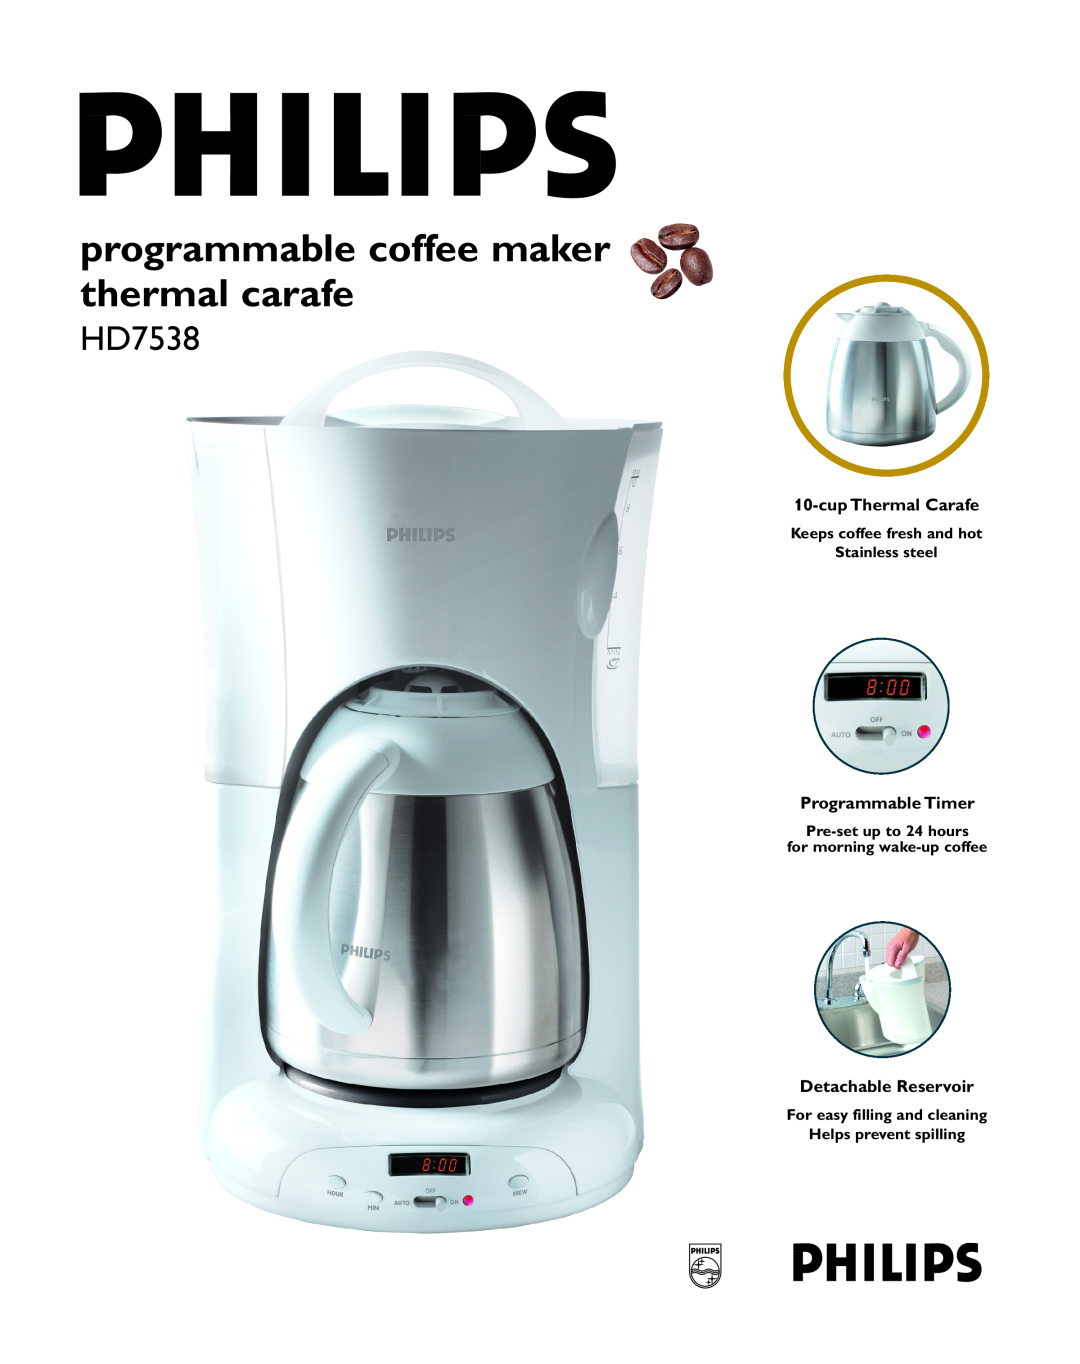 Philips HD7538 manual programmable coffee maker thermal carafe, Keeps coffee fresh and hot Stainless steel 